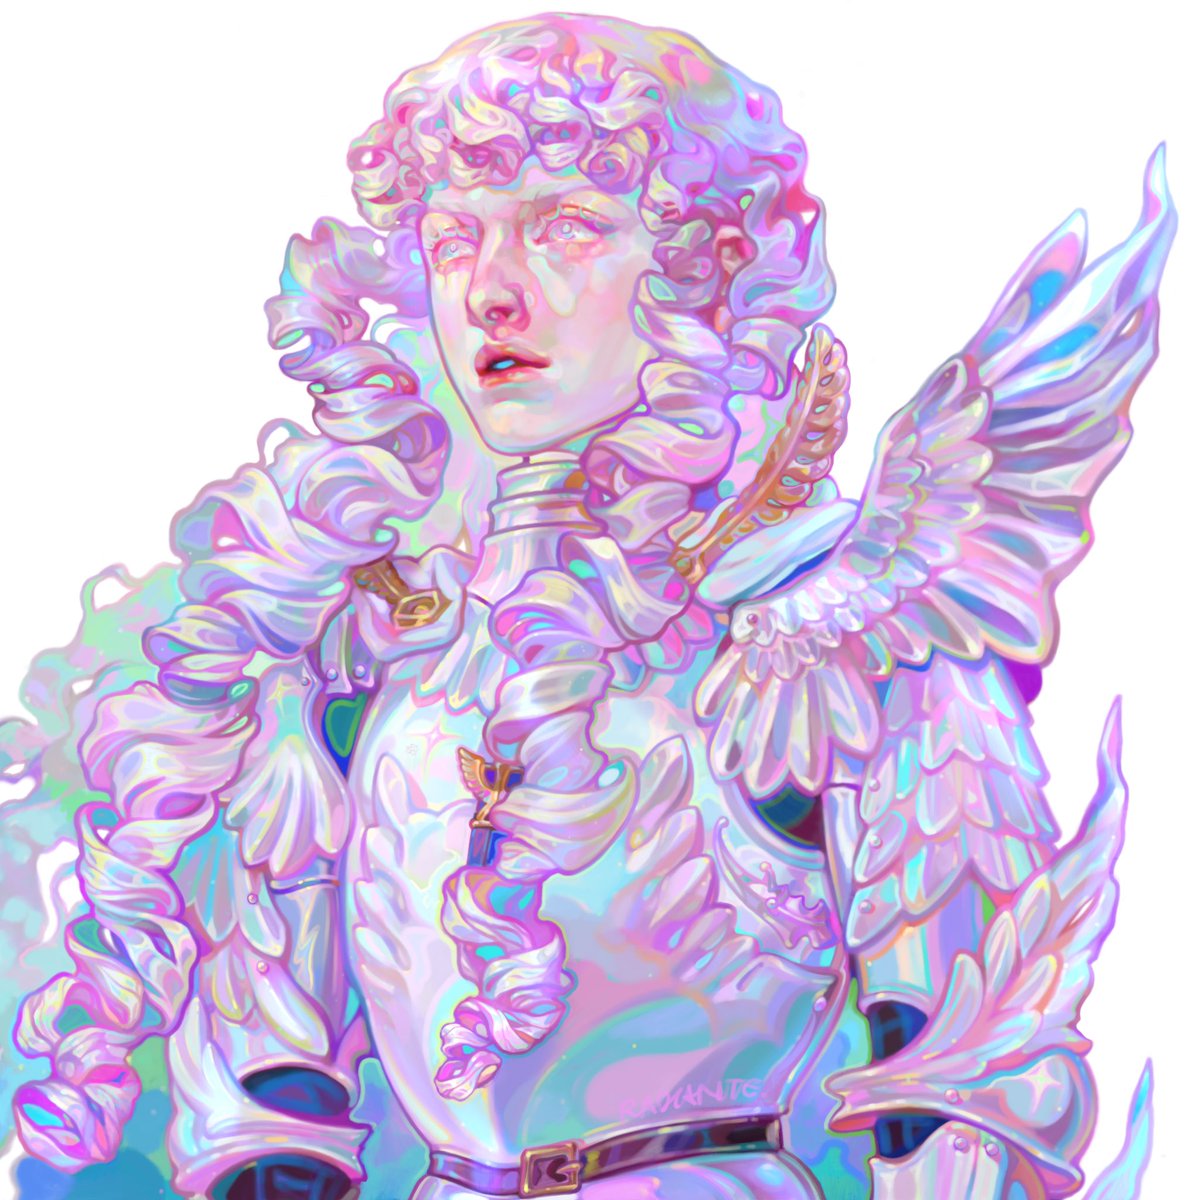 Griffith with Bernini perm Rest in Peace Miura you fathered a generation of fantasy edgelords🤍🤍🤍